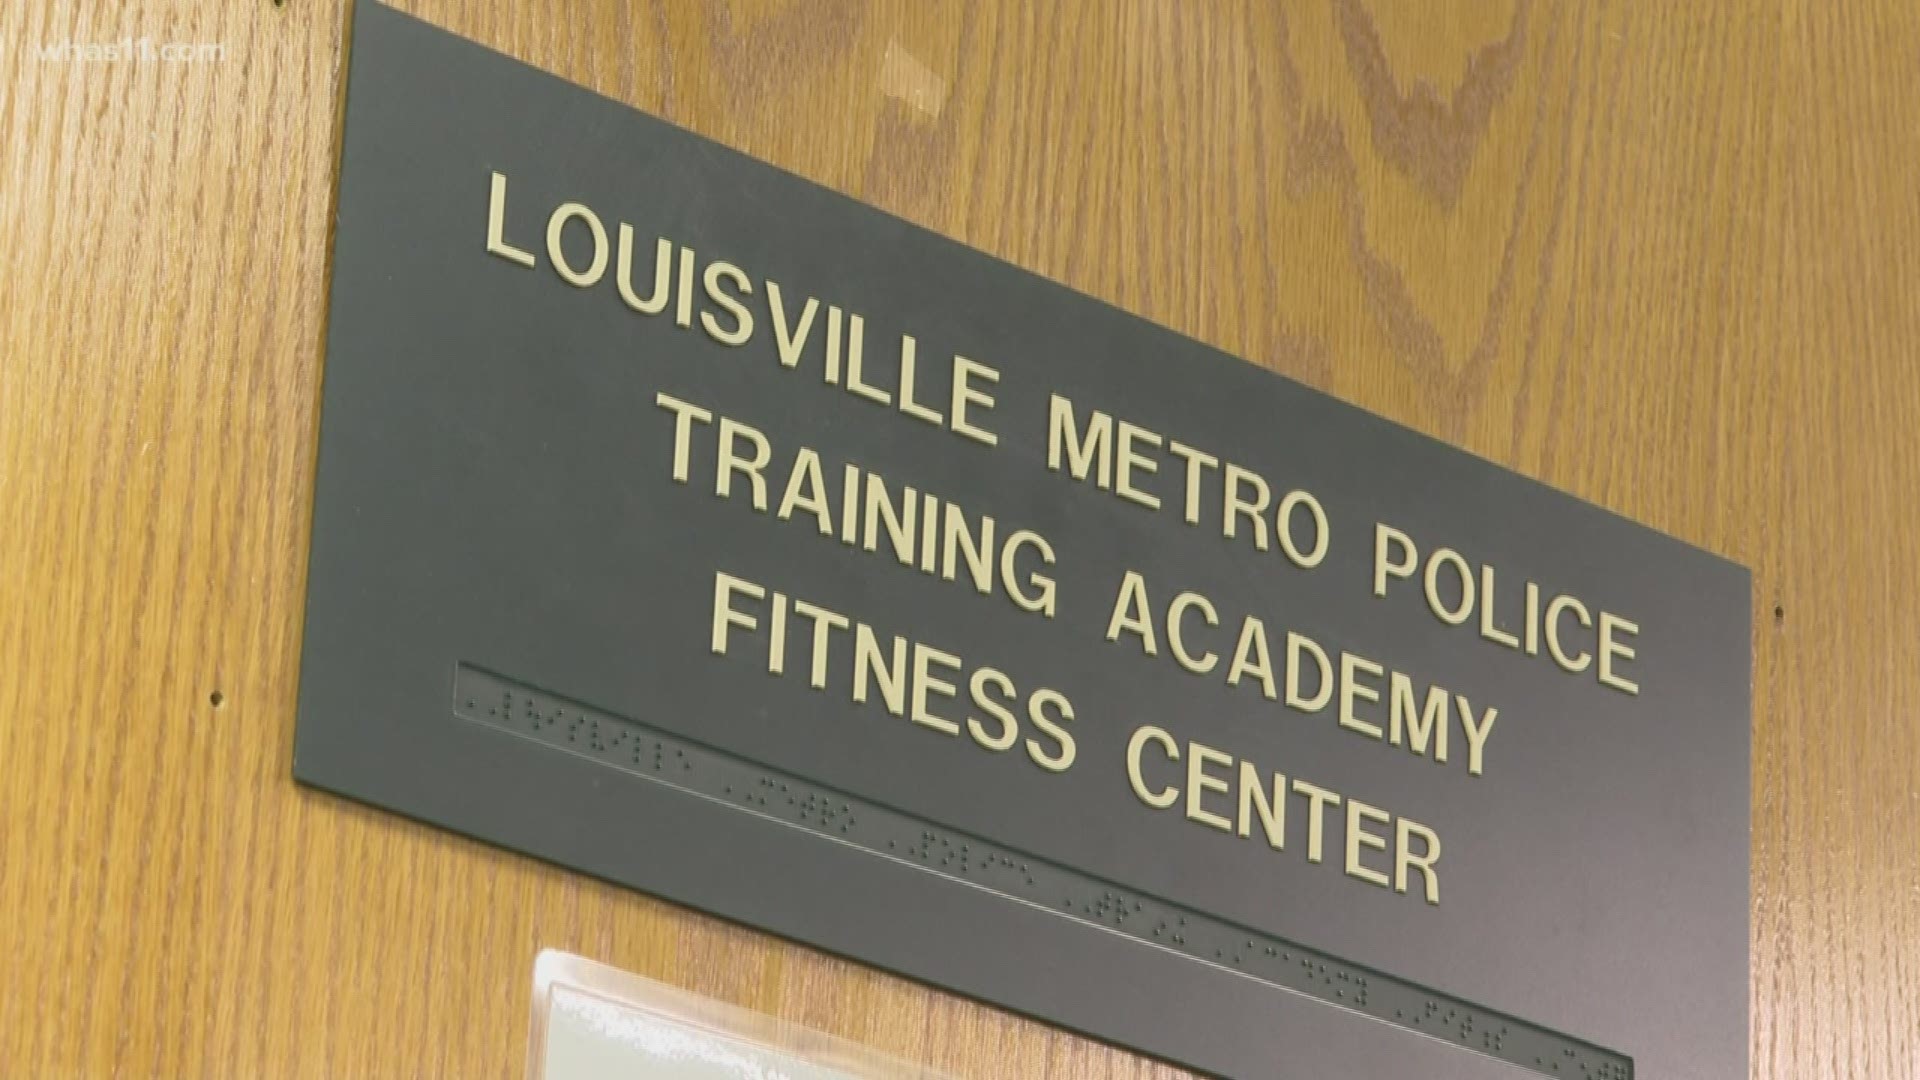 LMPD can take about 48 people per recruit class